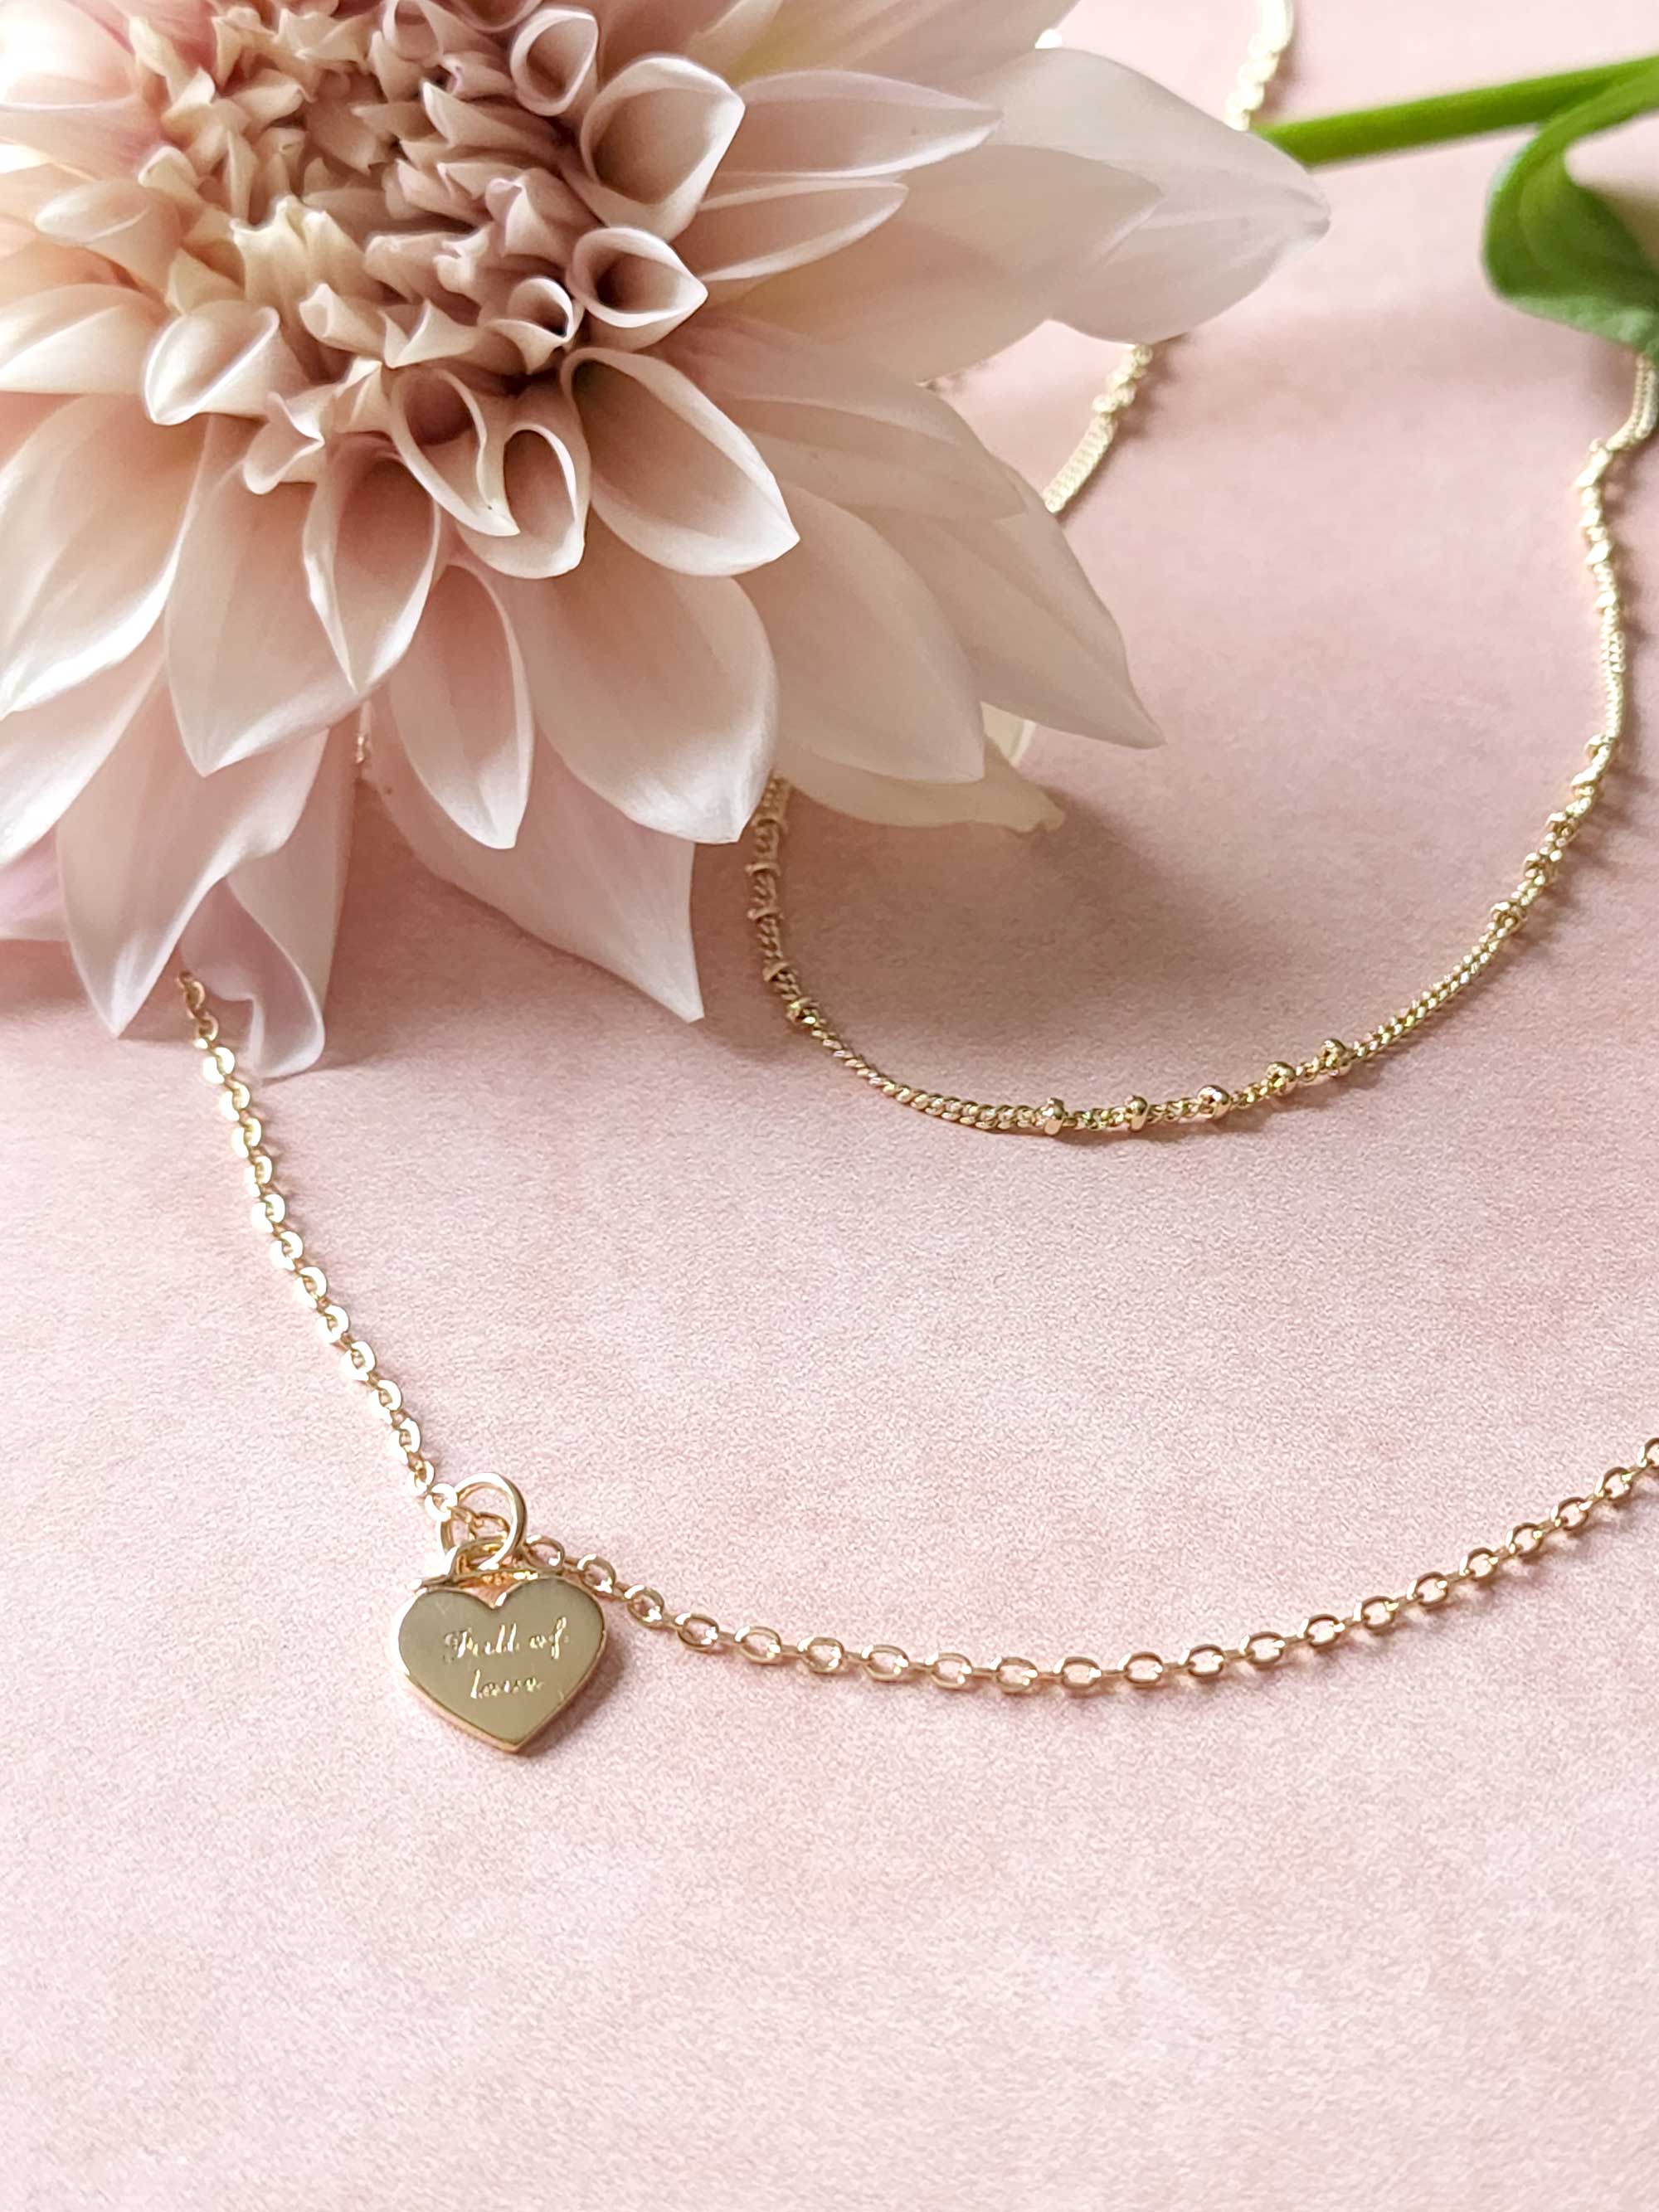 Engraved heart necklace duo (SD1687)